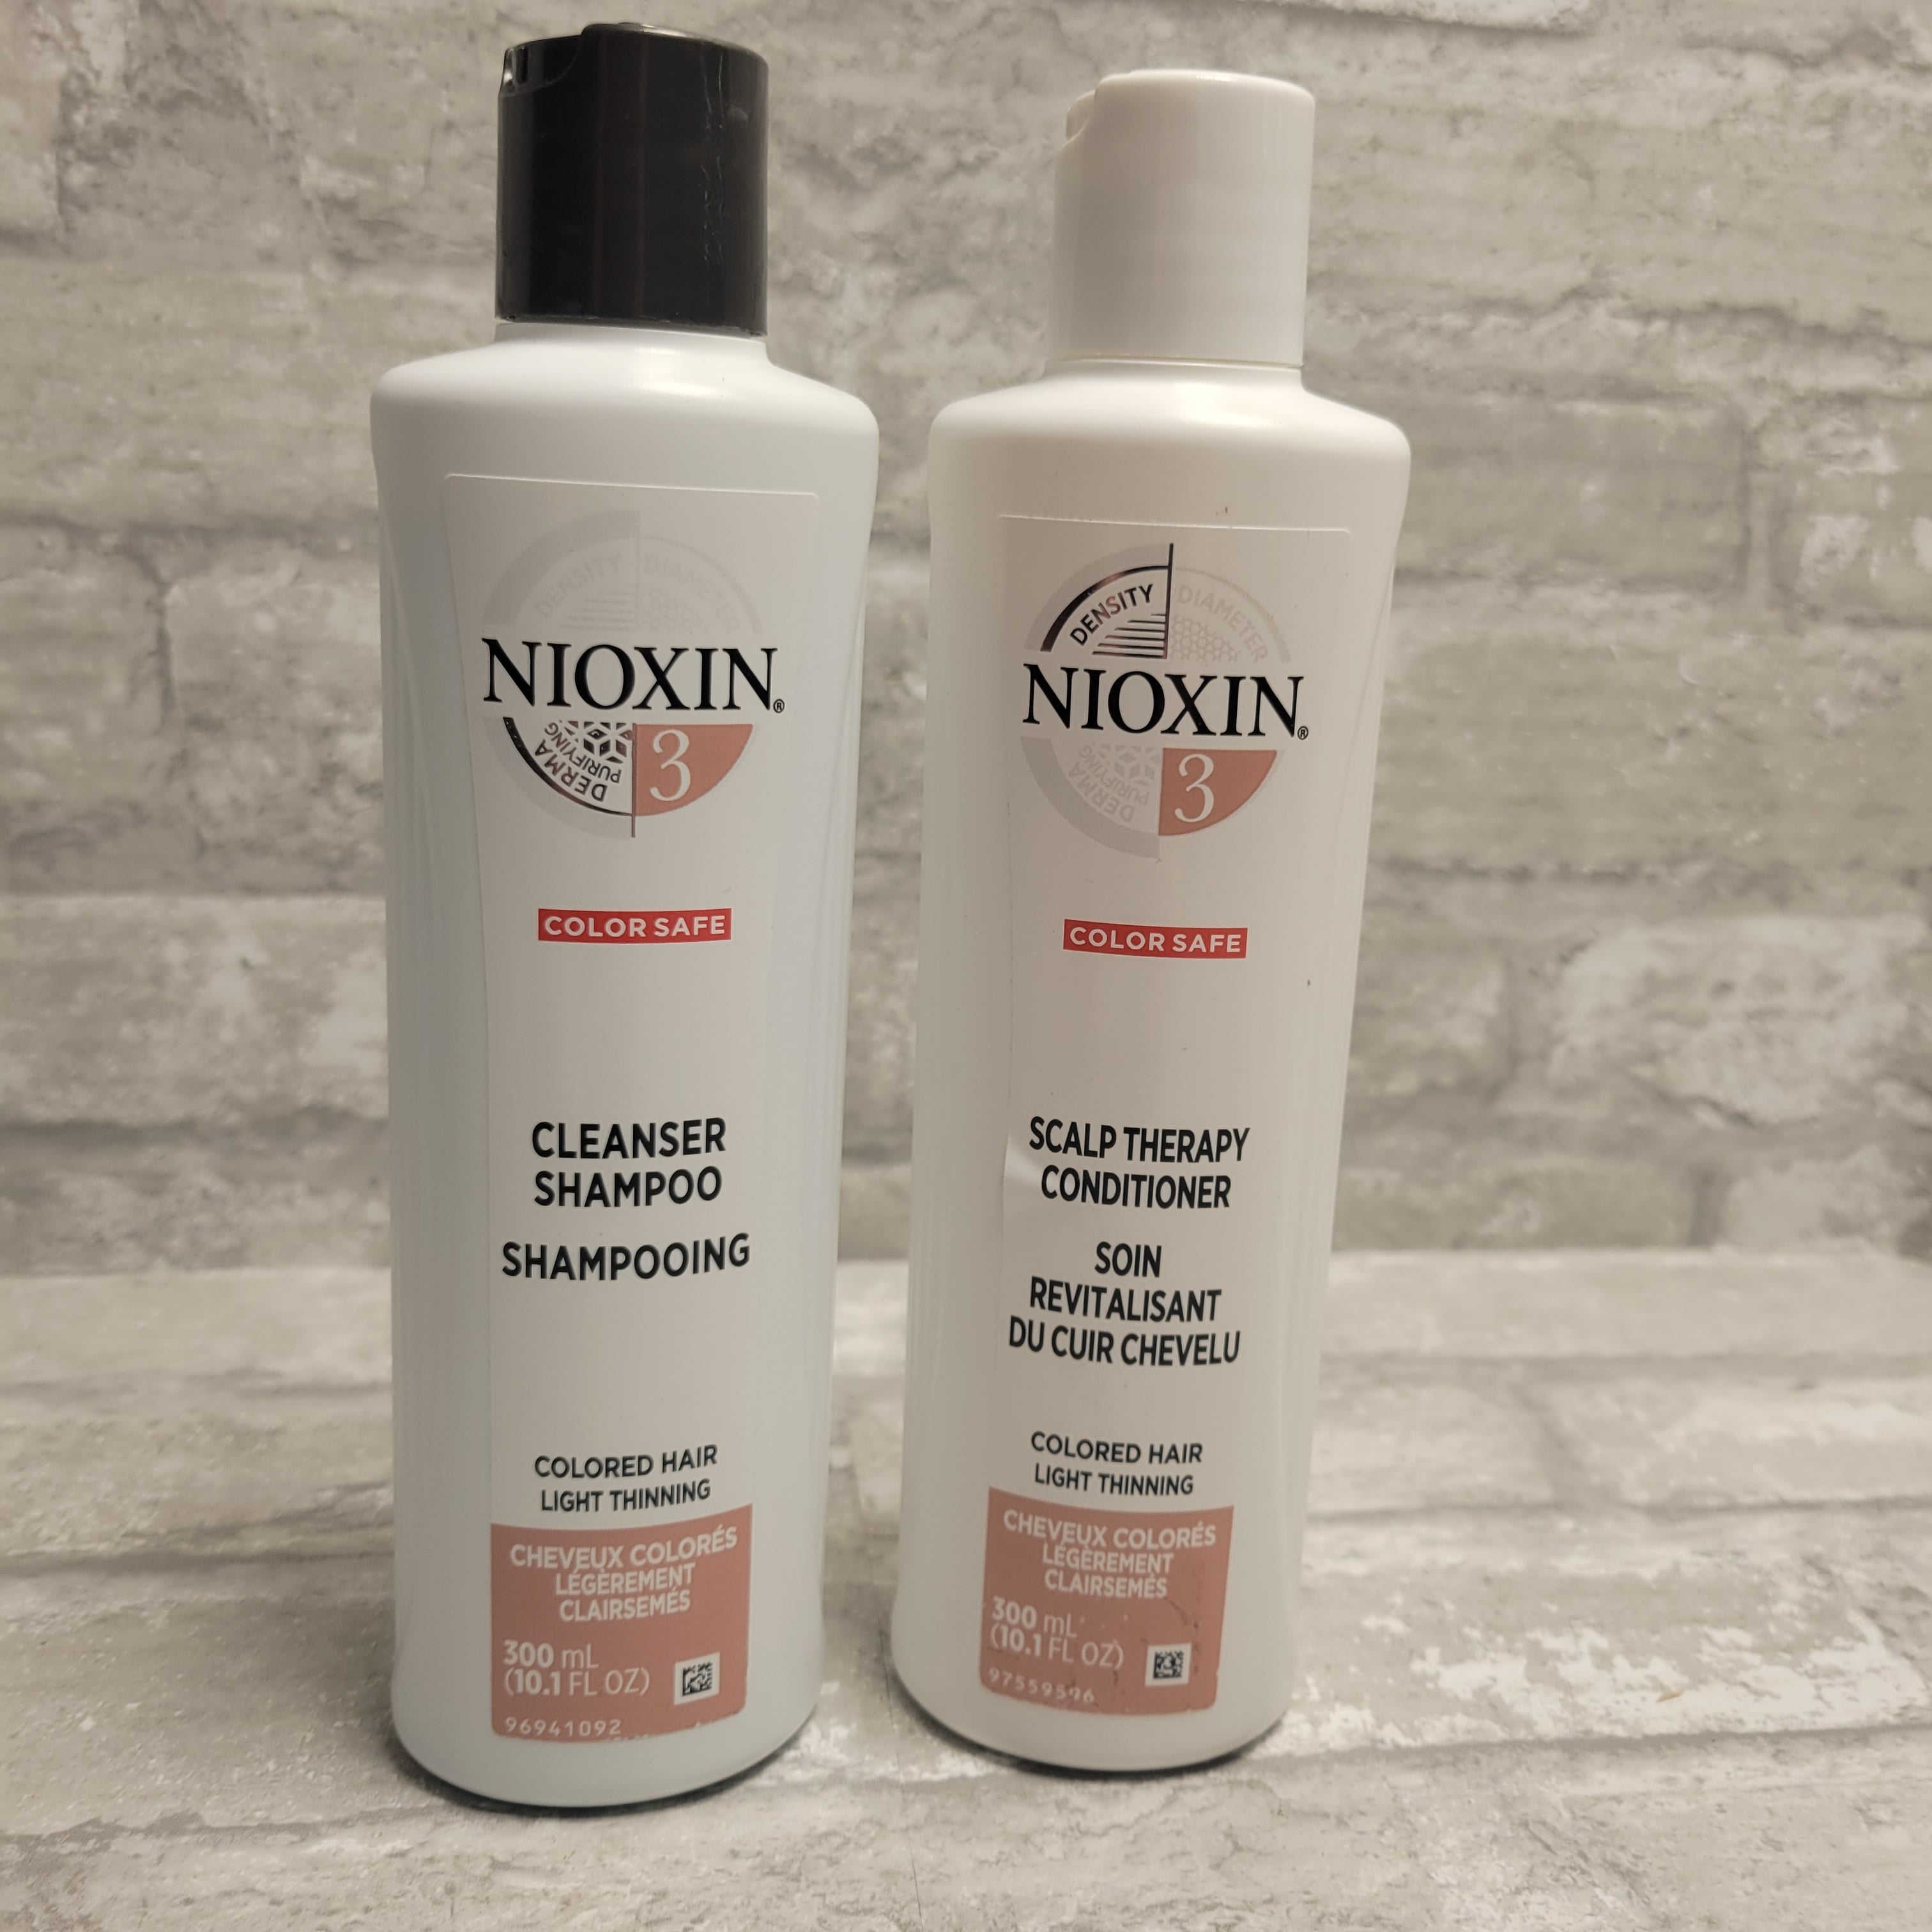 NIOXIN System 3 Shampoo & Conditioner for Colored Light Thinning Hair 10.1 FlOz (8070391529710)